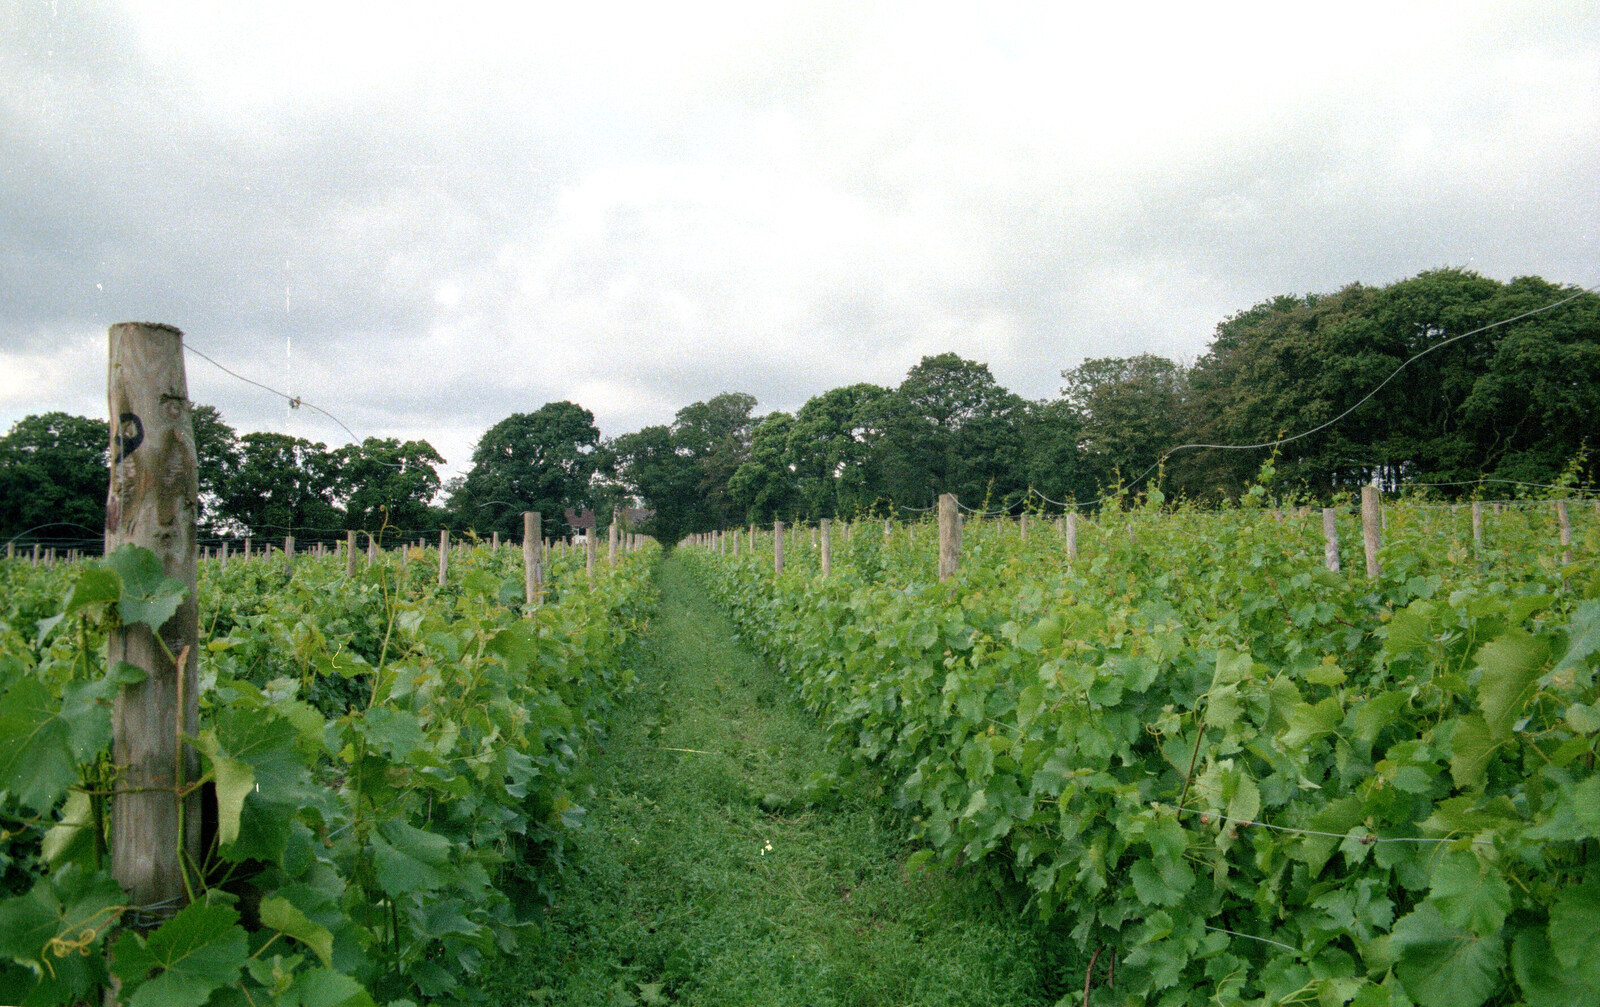 The vines of Harrow Vineyard from A Vineyard Miscellany, Bransgore and the New Forest - 18th July 1986